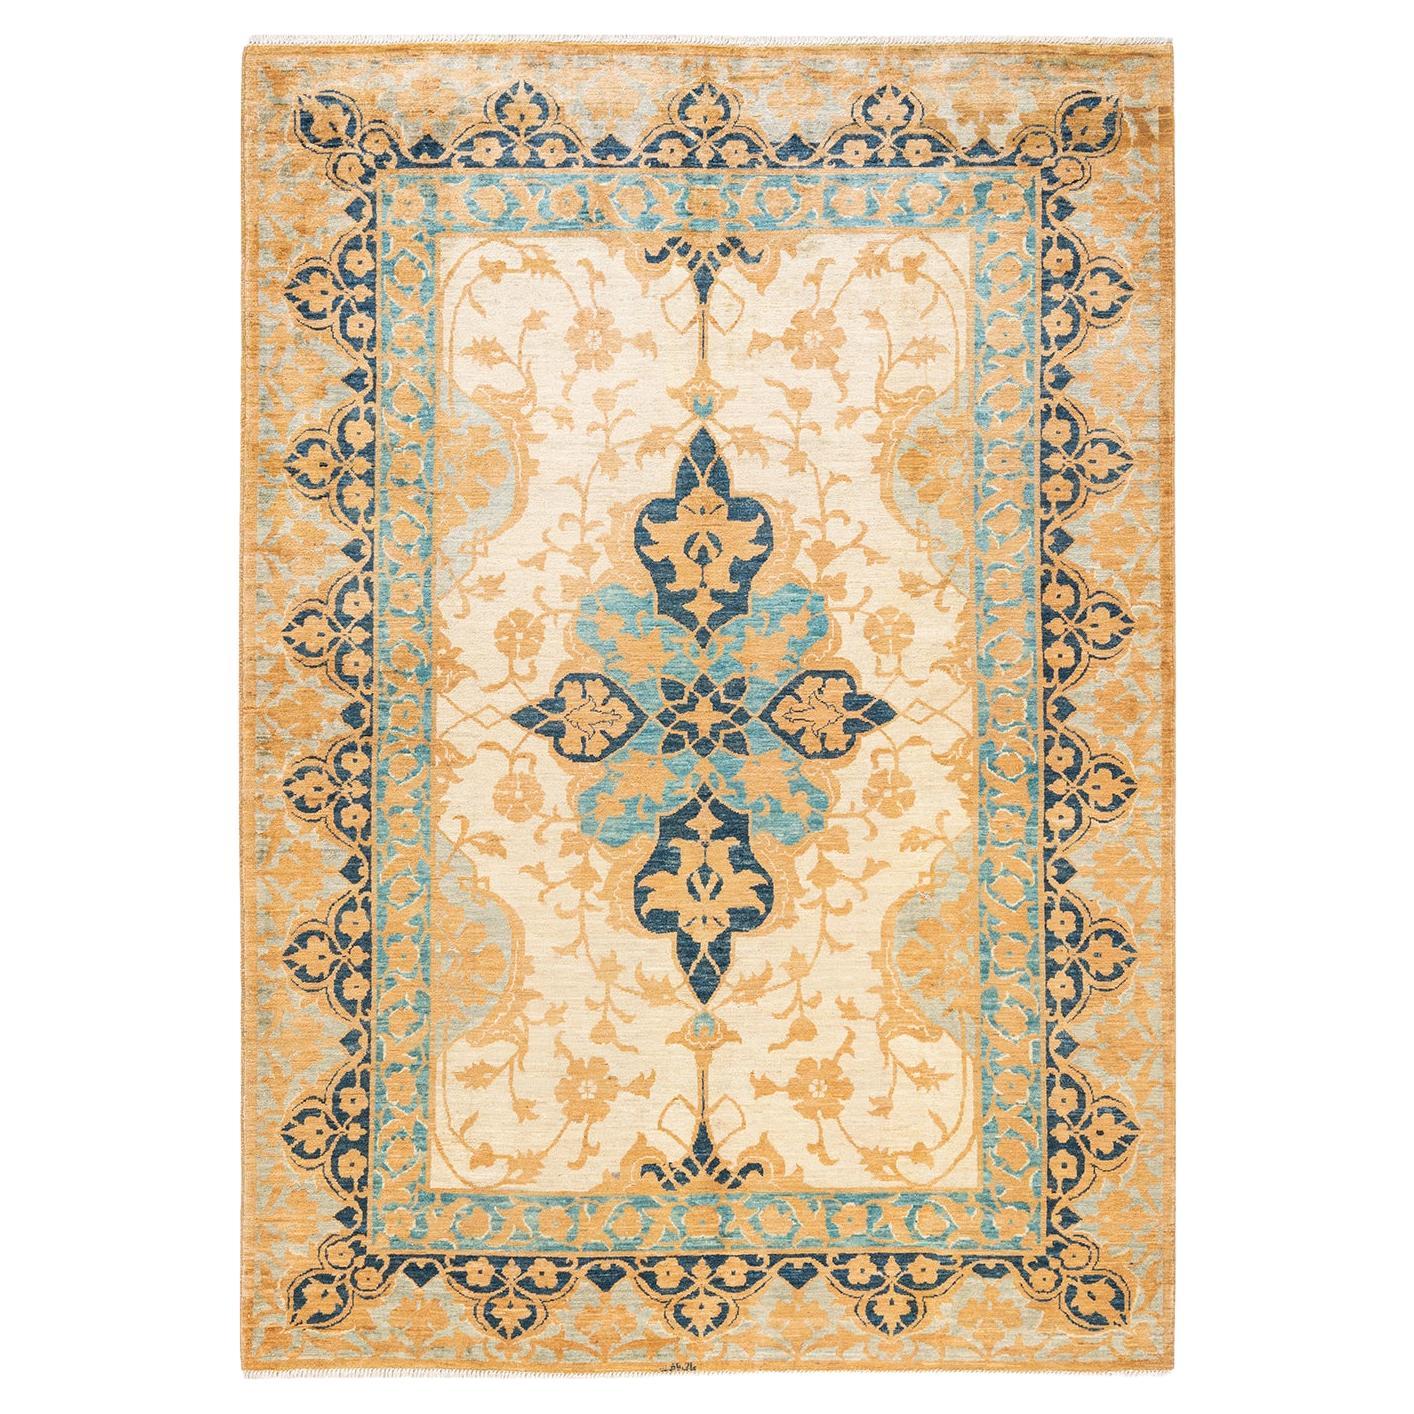 One-of-a-kind Hand Knotted Oriental Eclectic Yellow Area Rug